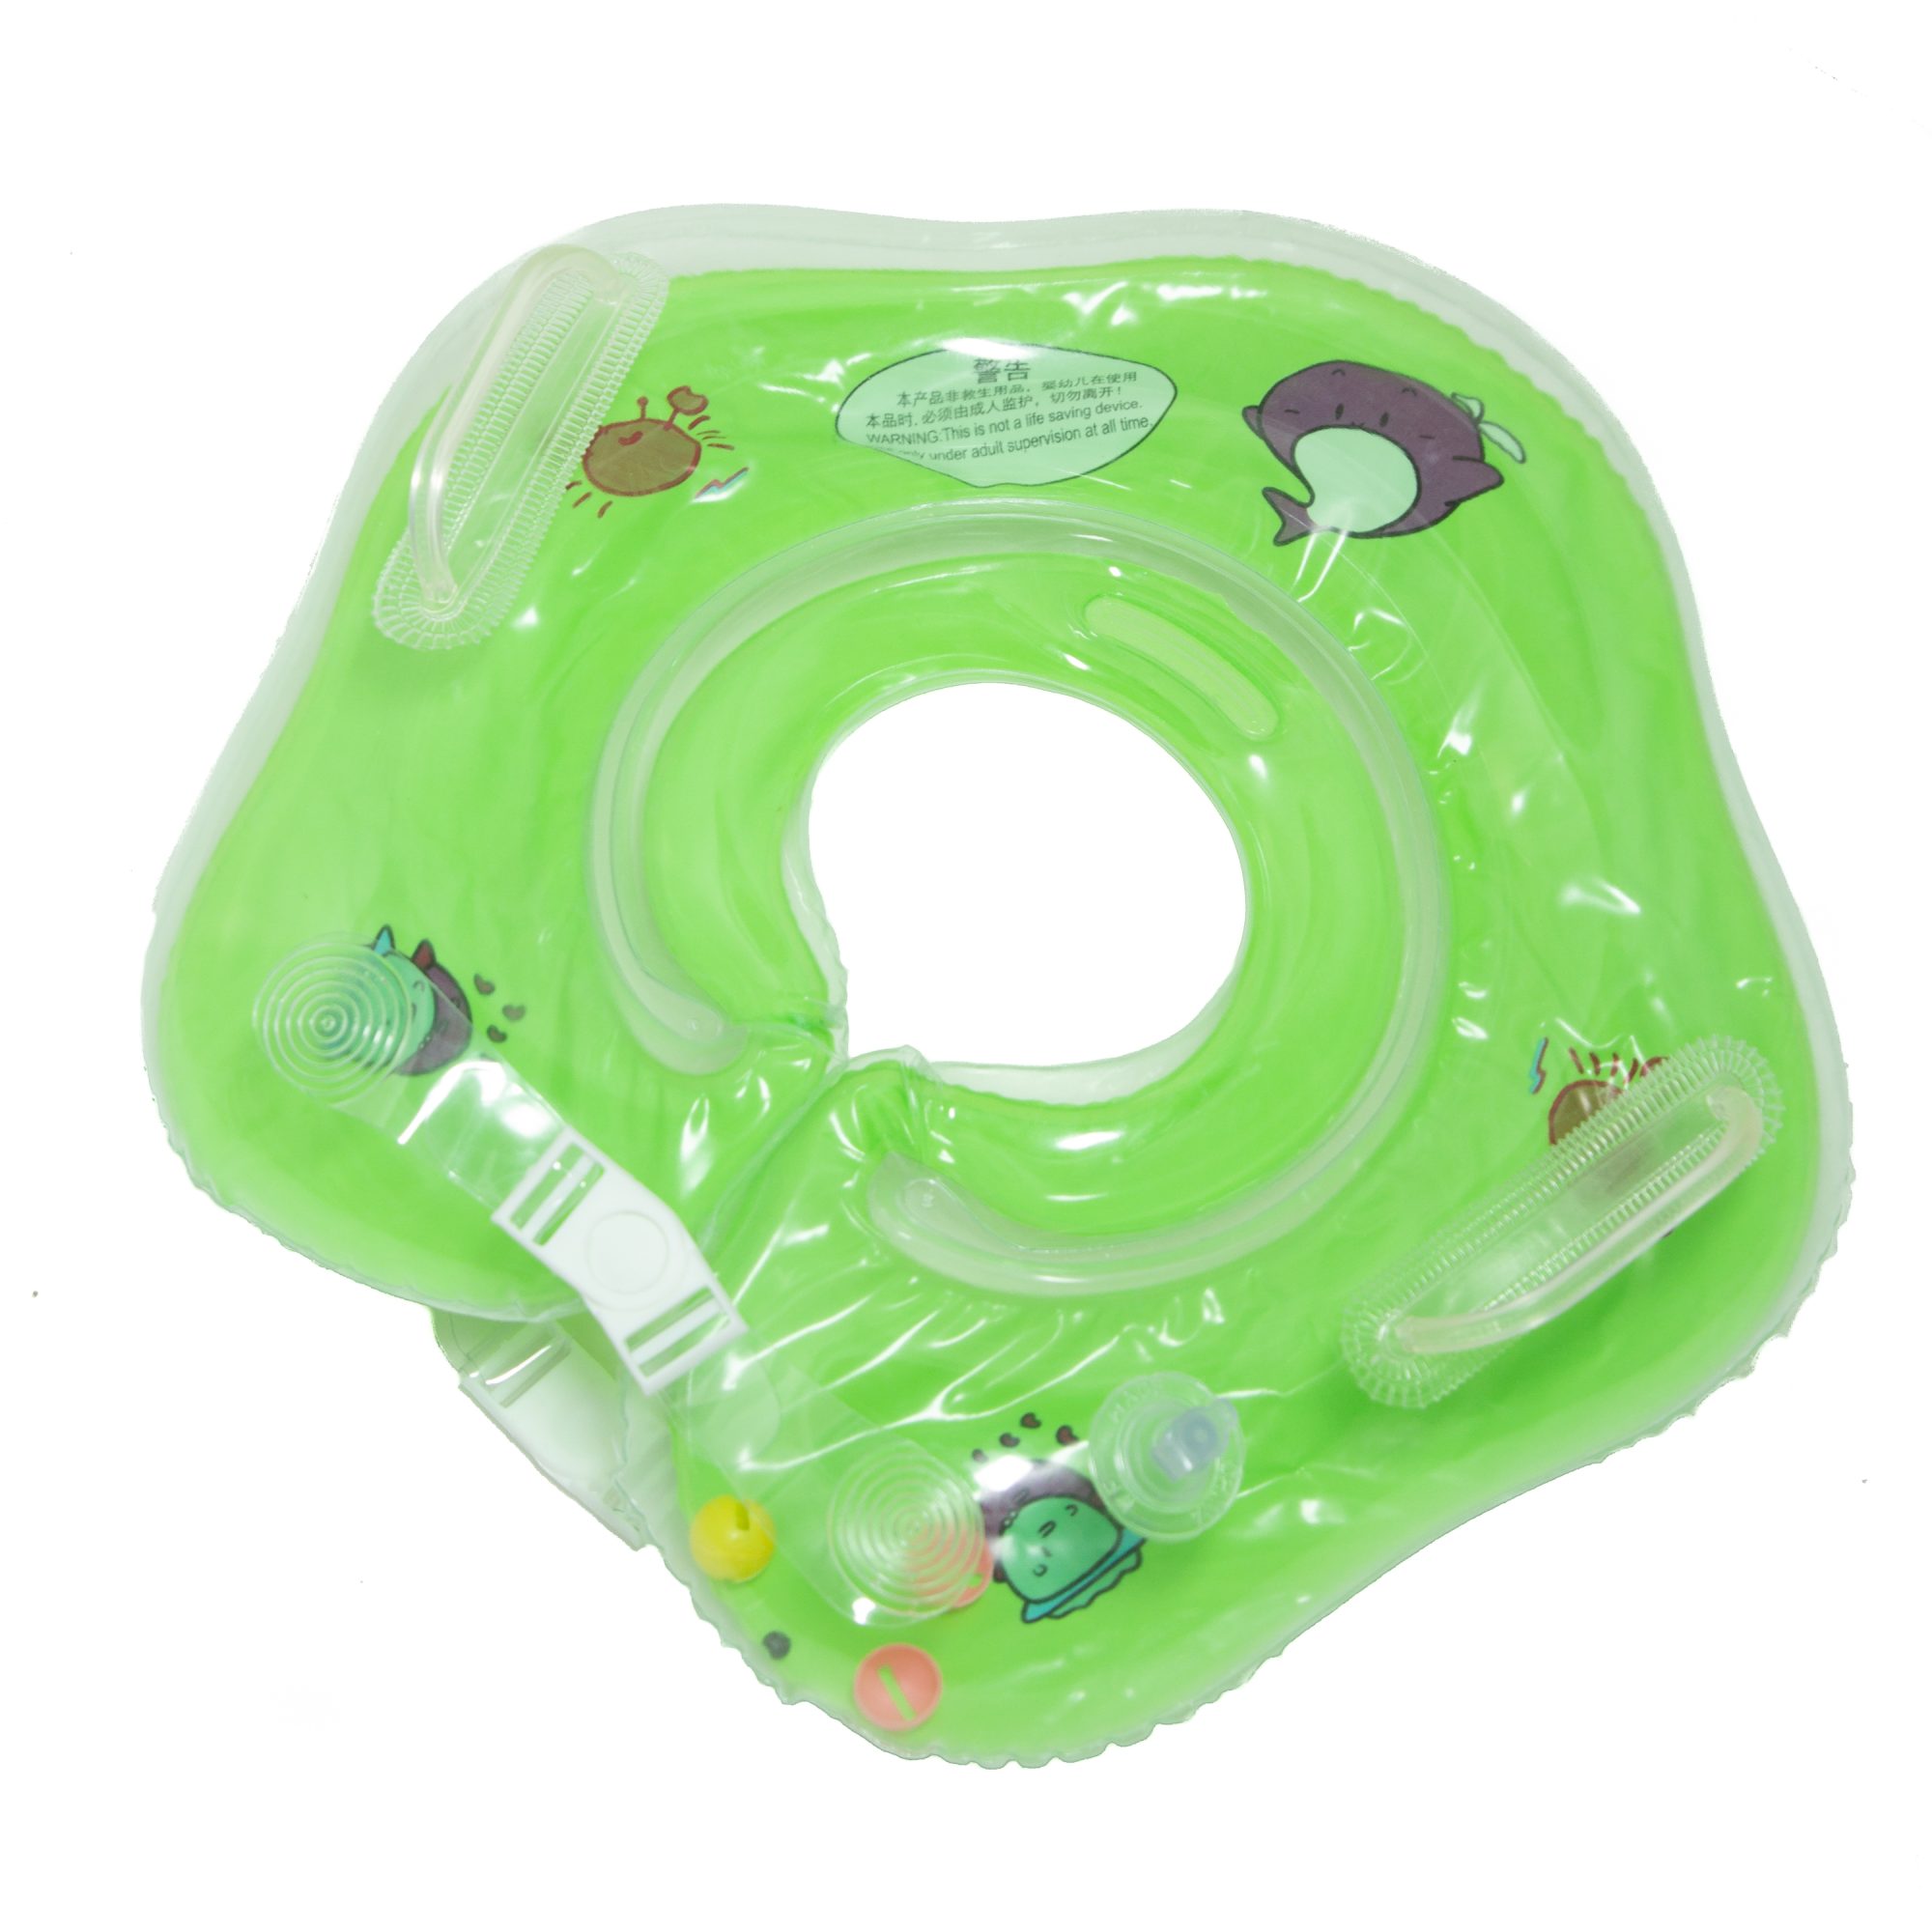 Pikkaboo - ISwimSafe Infant Neck Floater - Green